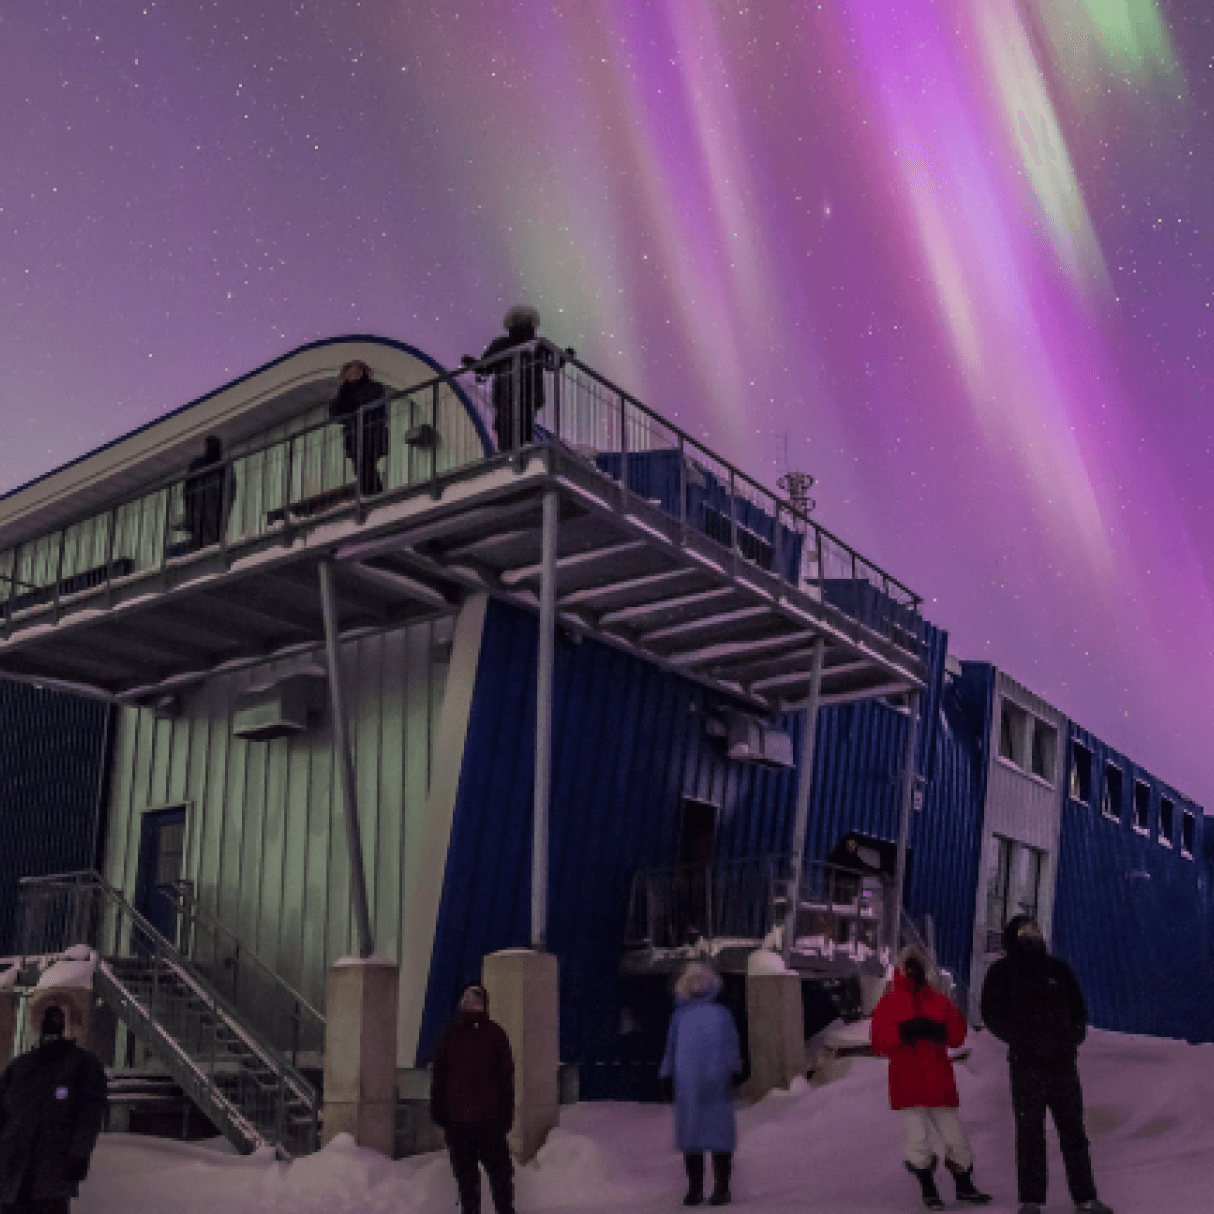 A group of people stand in the snow outside a small building. They look at pink, purple, and green northern lights in the night sky.